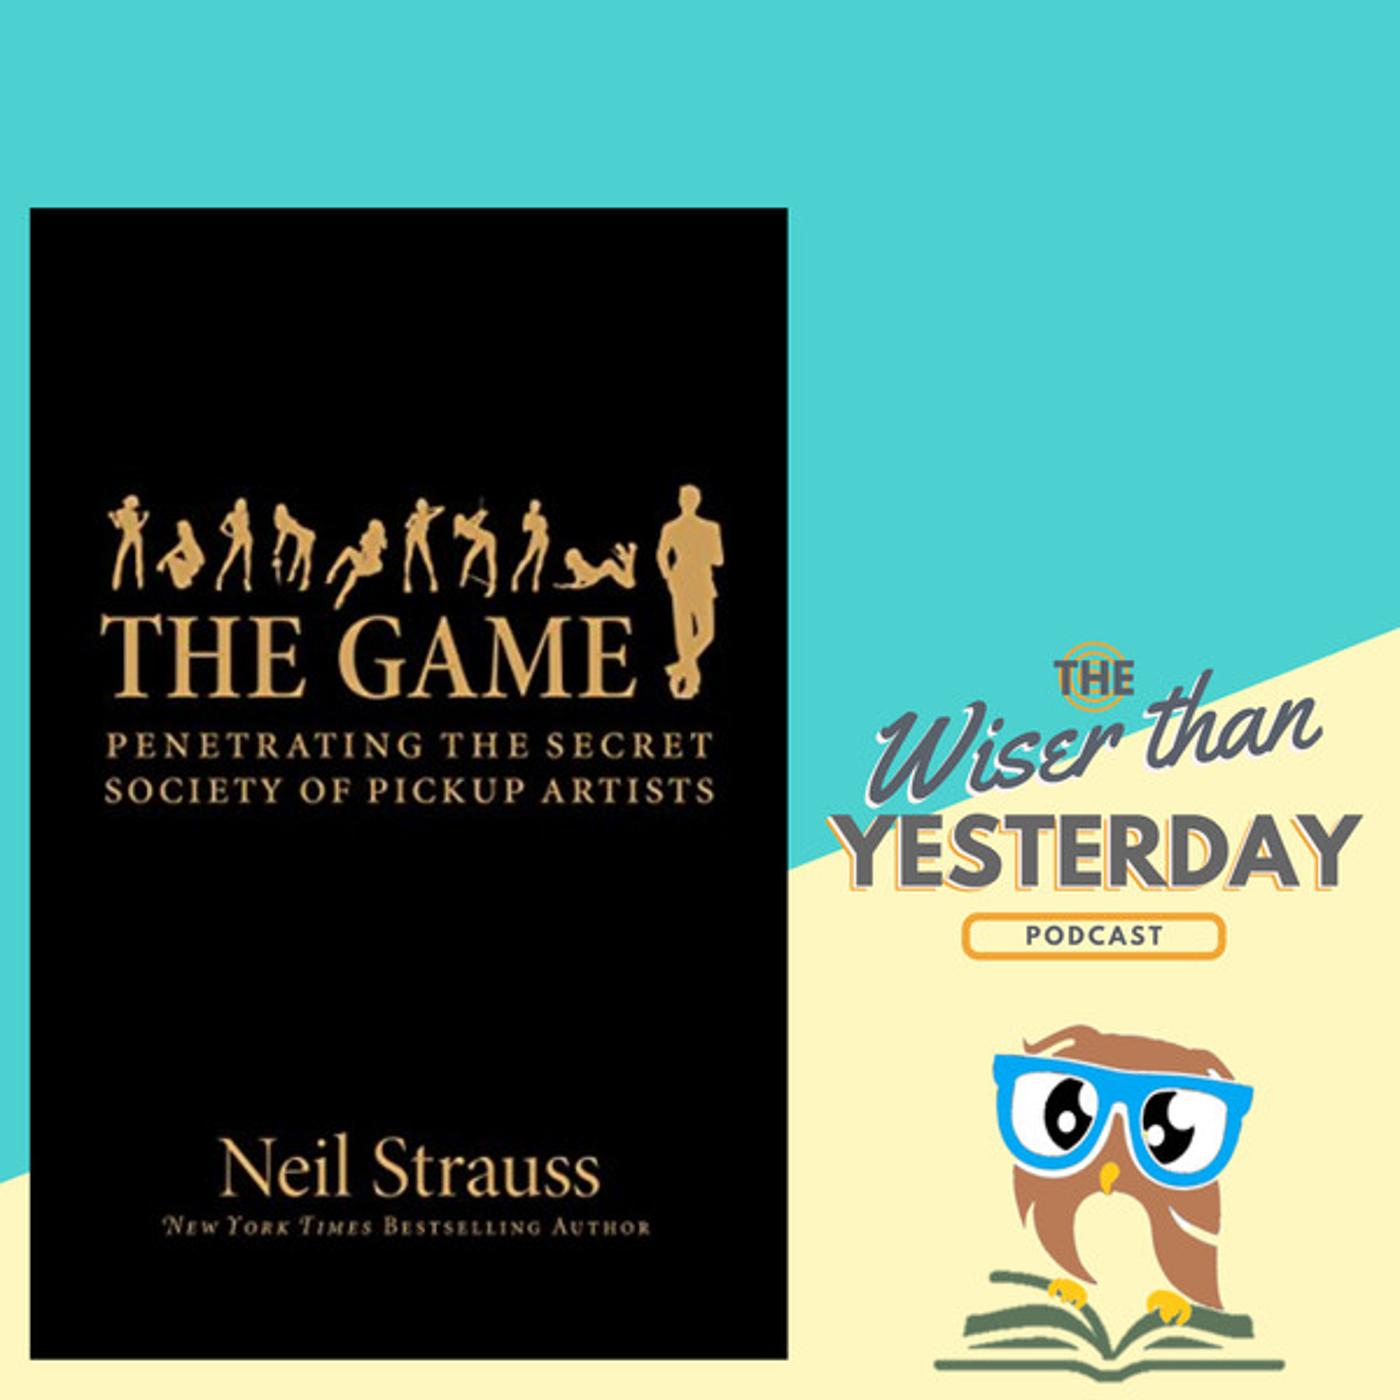 4. The Game: Penetrating the Secret Society of Pickup Artists - Niel Strauss